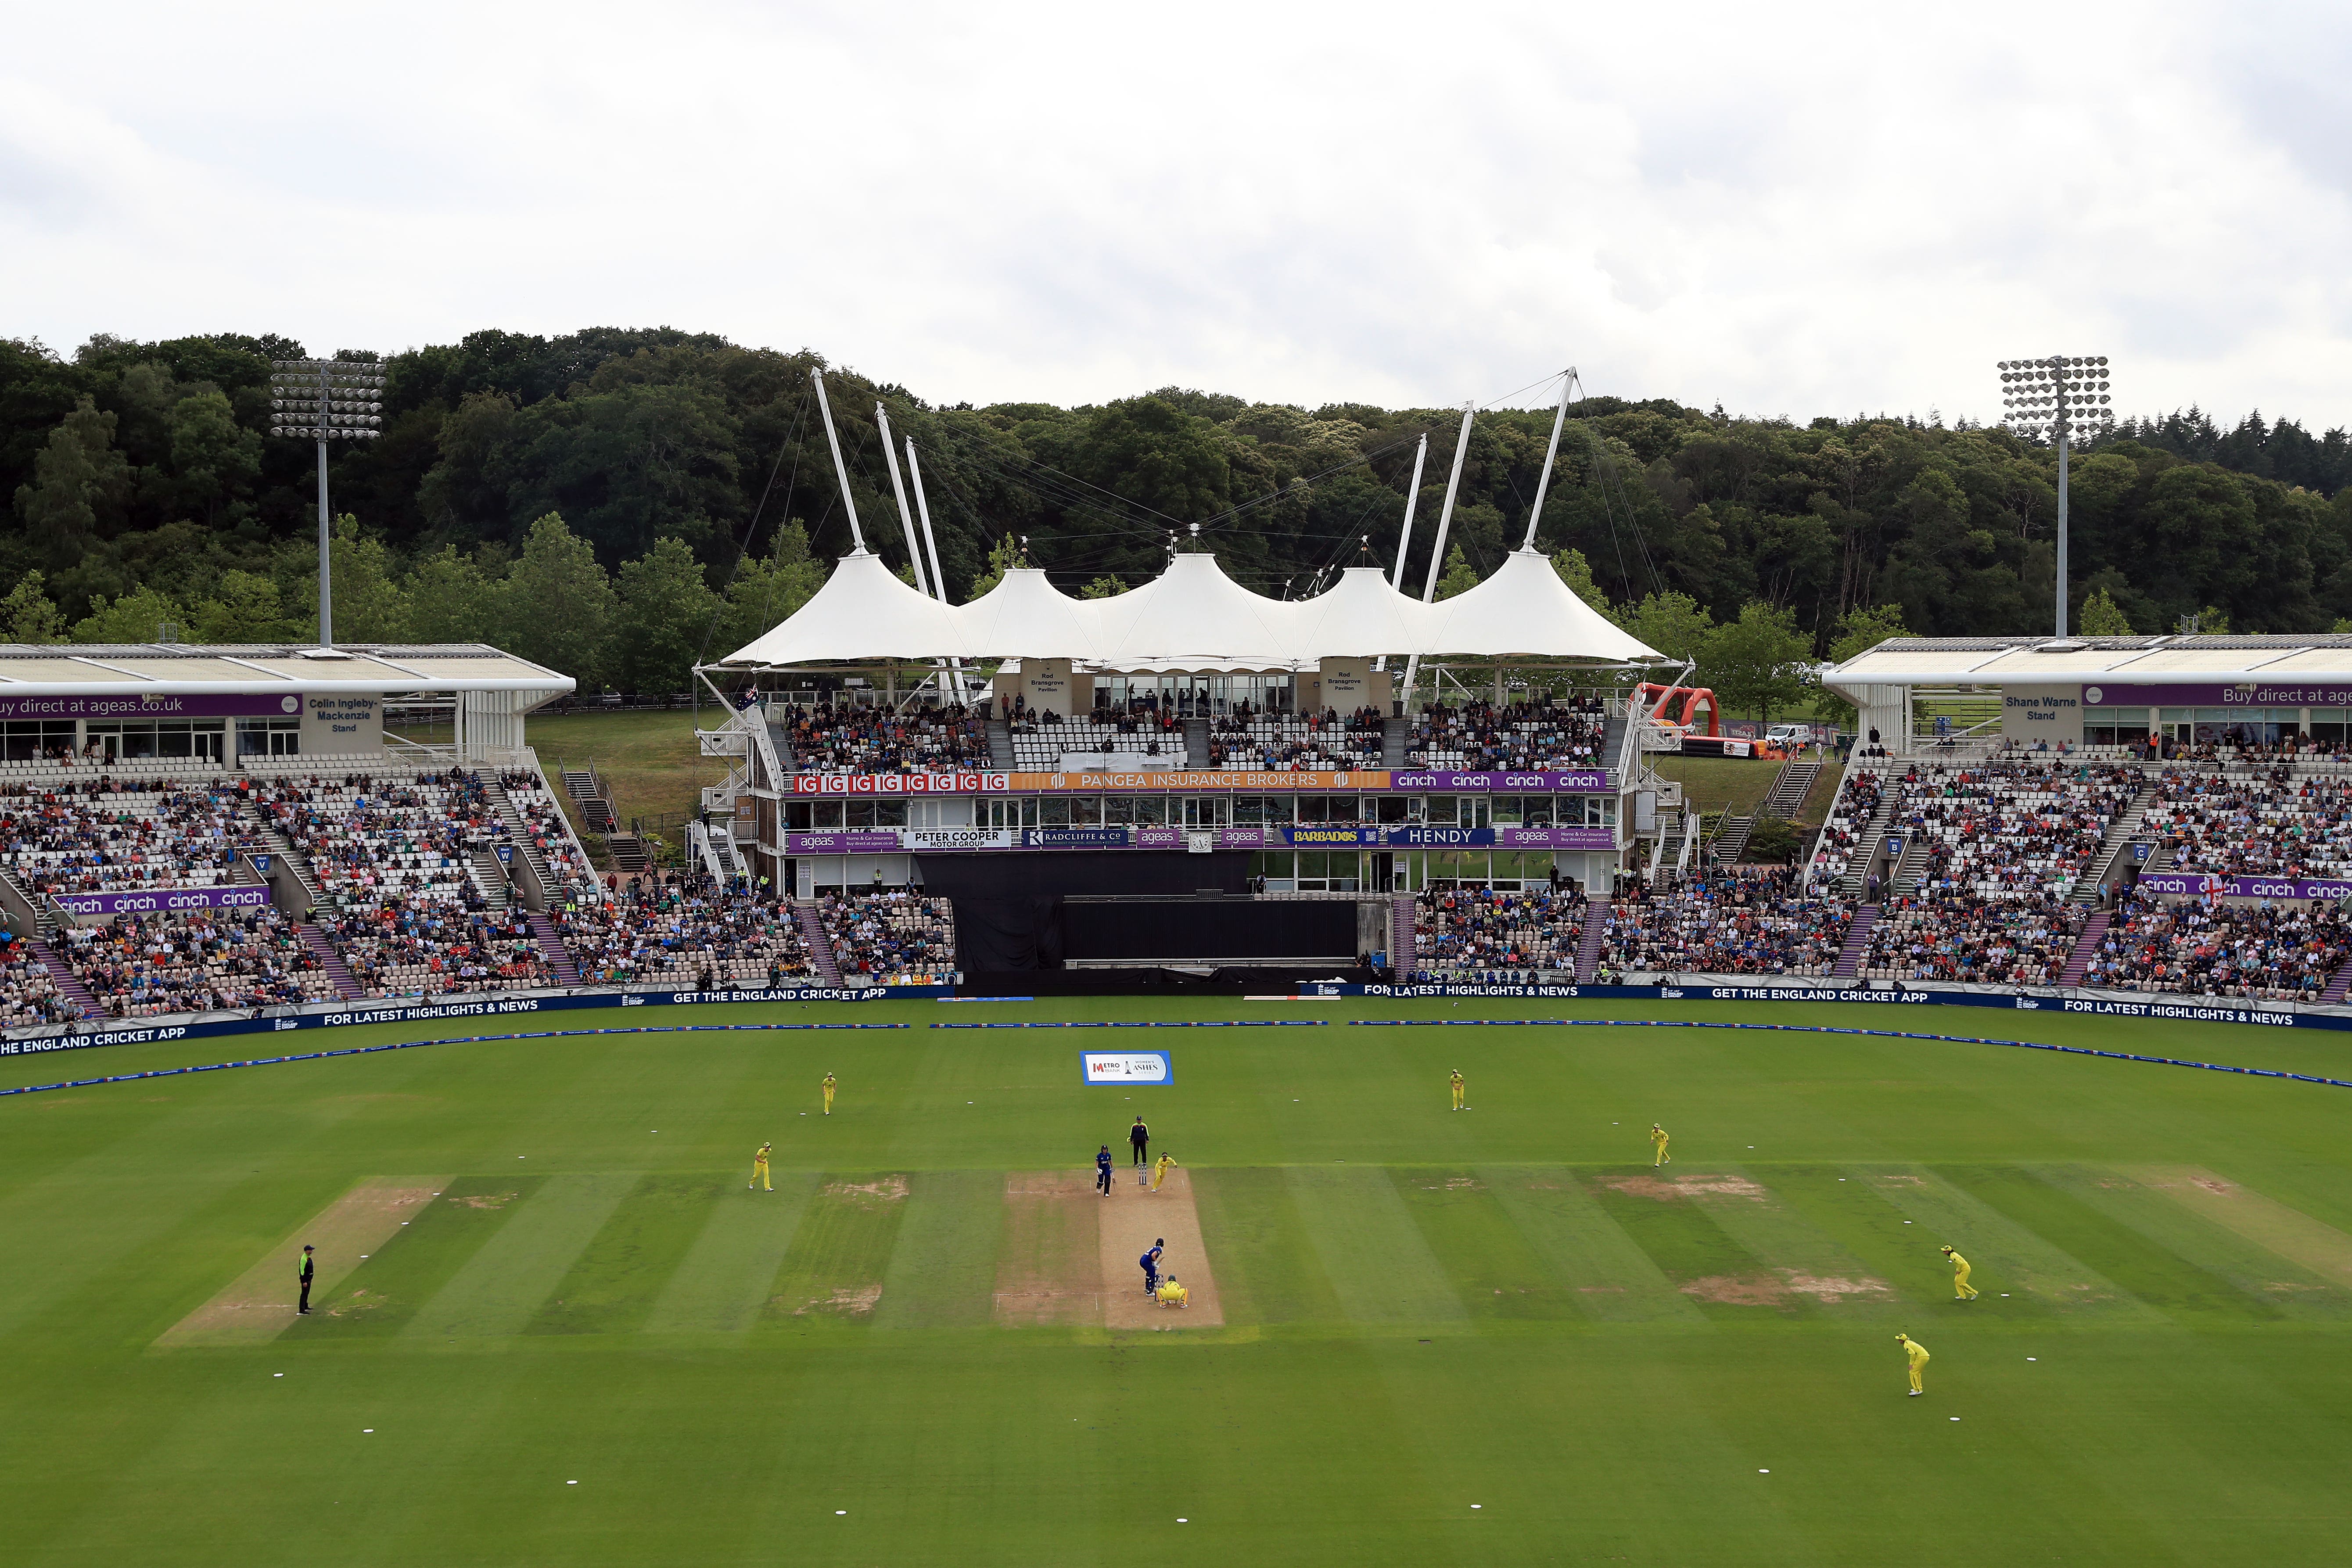 Hampshire’s home ground will be known as the Utilita Bowl from now on (Bradley Collyer/PA)